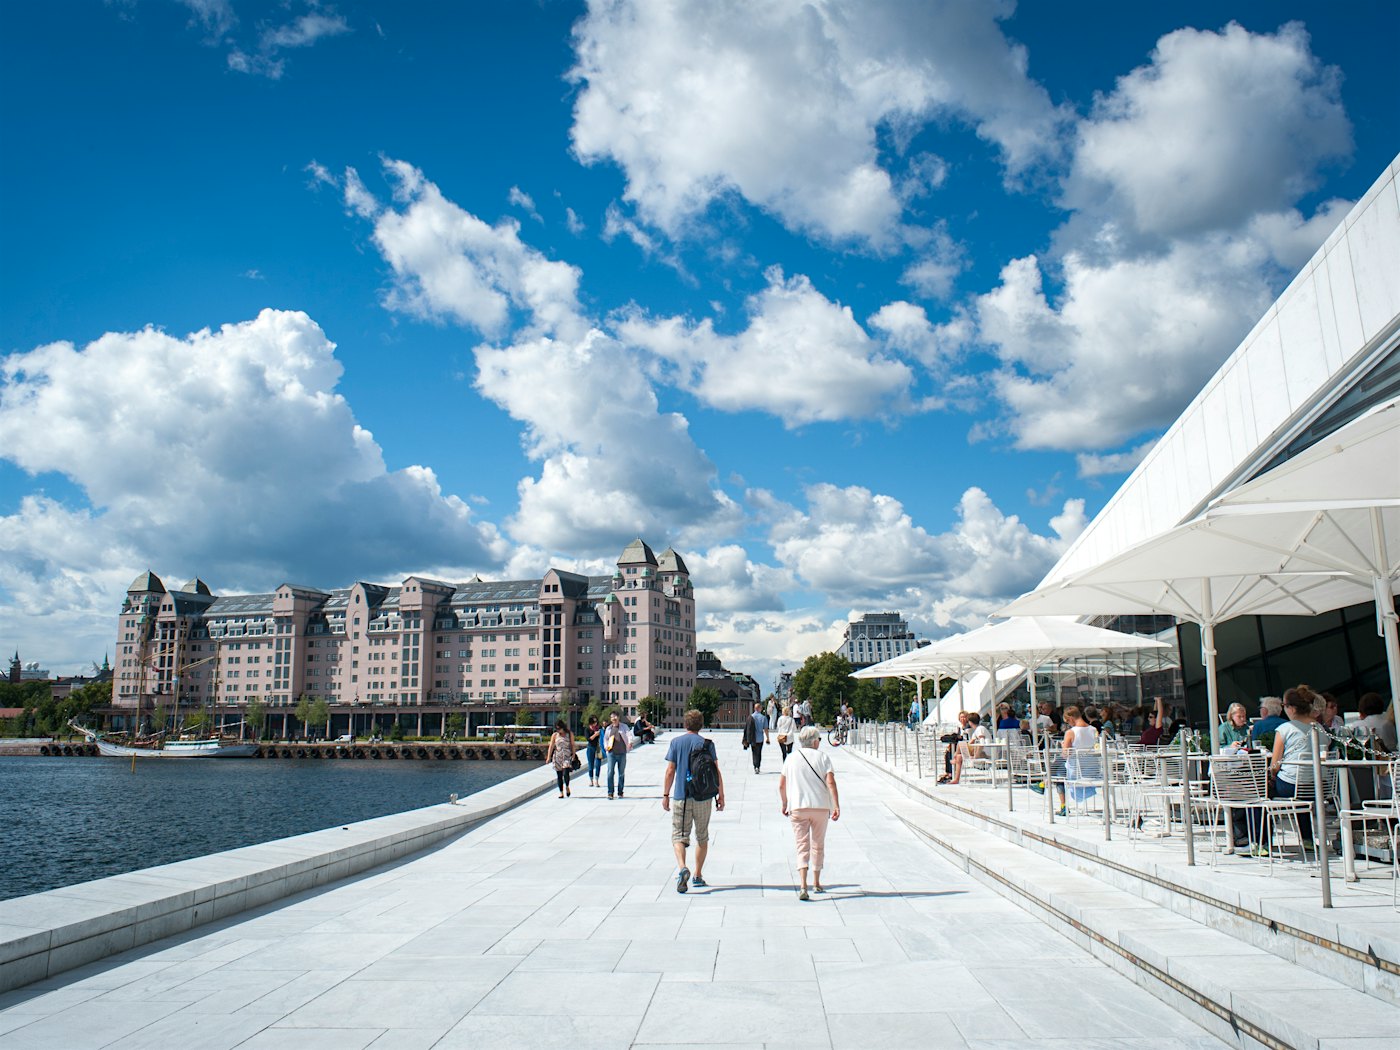 Passage in white marble with the opera house and restaurant on the right and the Oslofjord on the left. People walk in the passage. In the background you can see the city of Oslo.